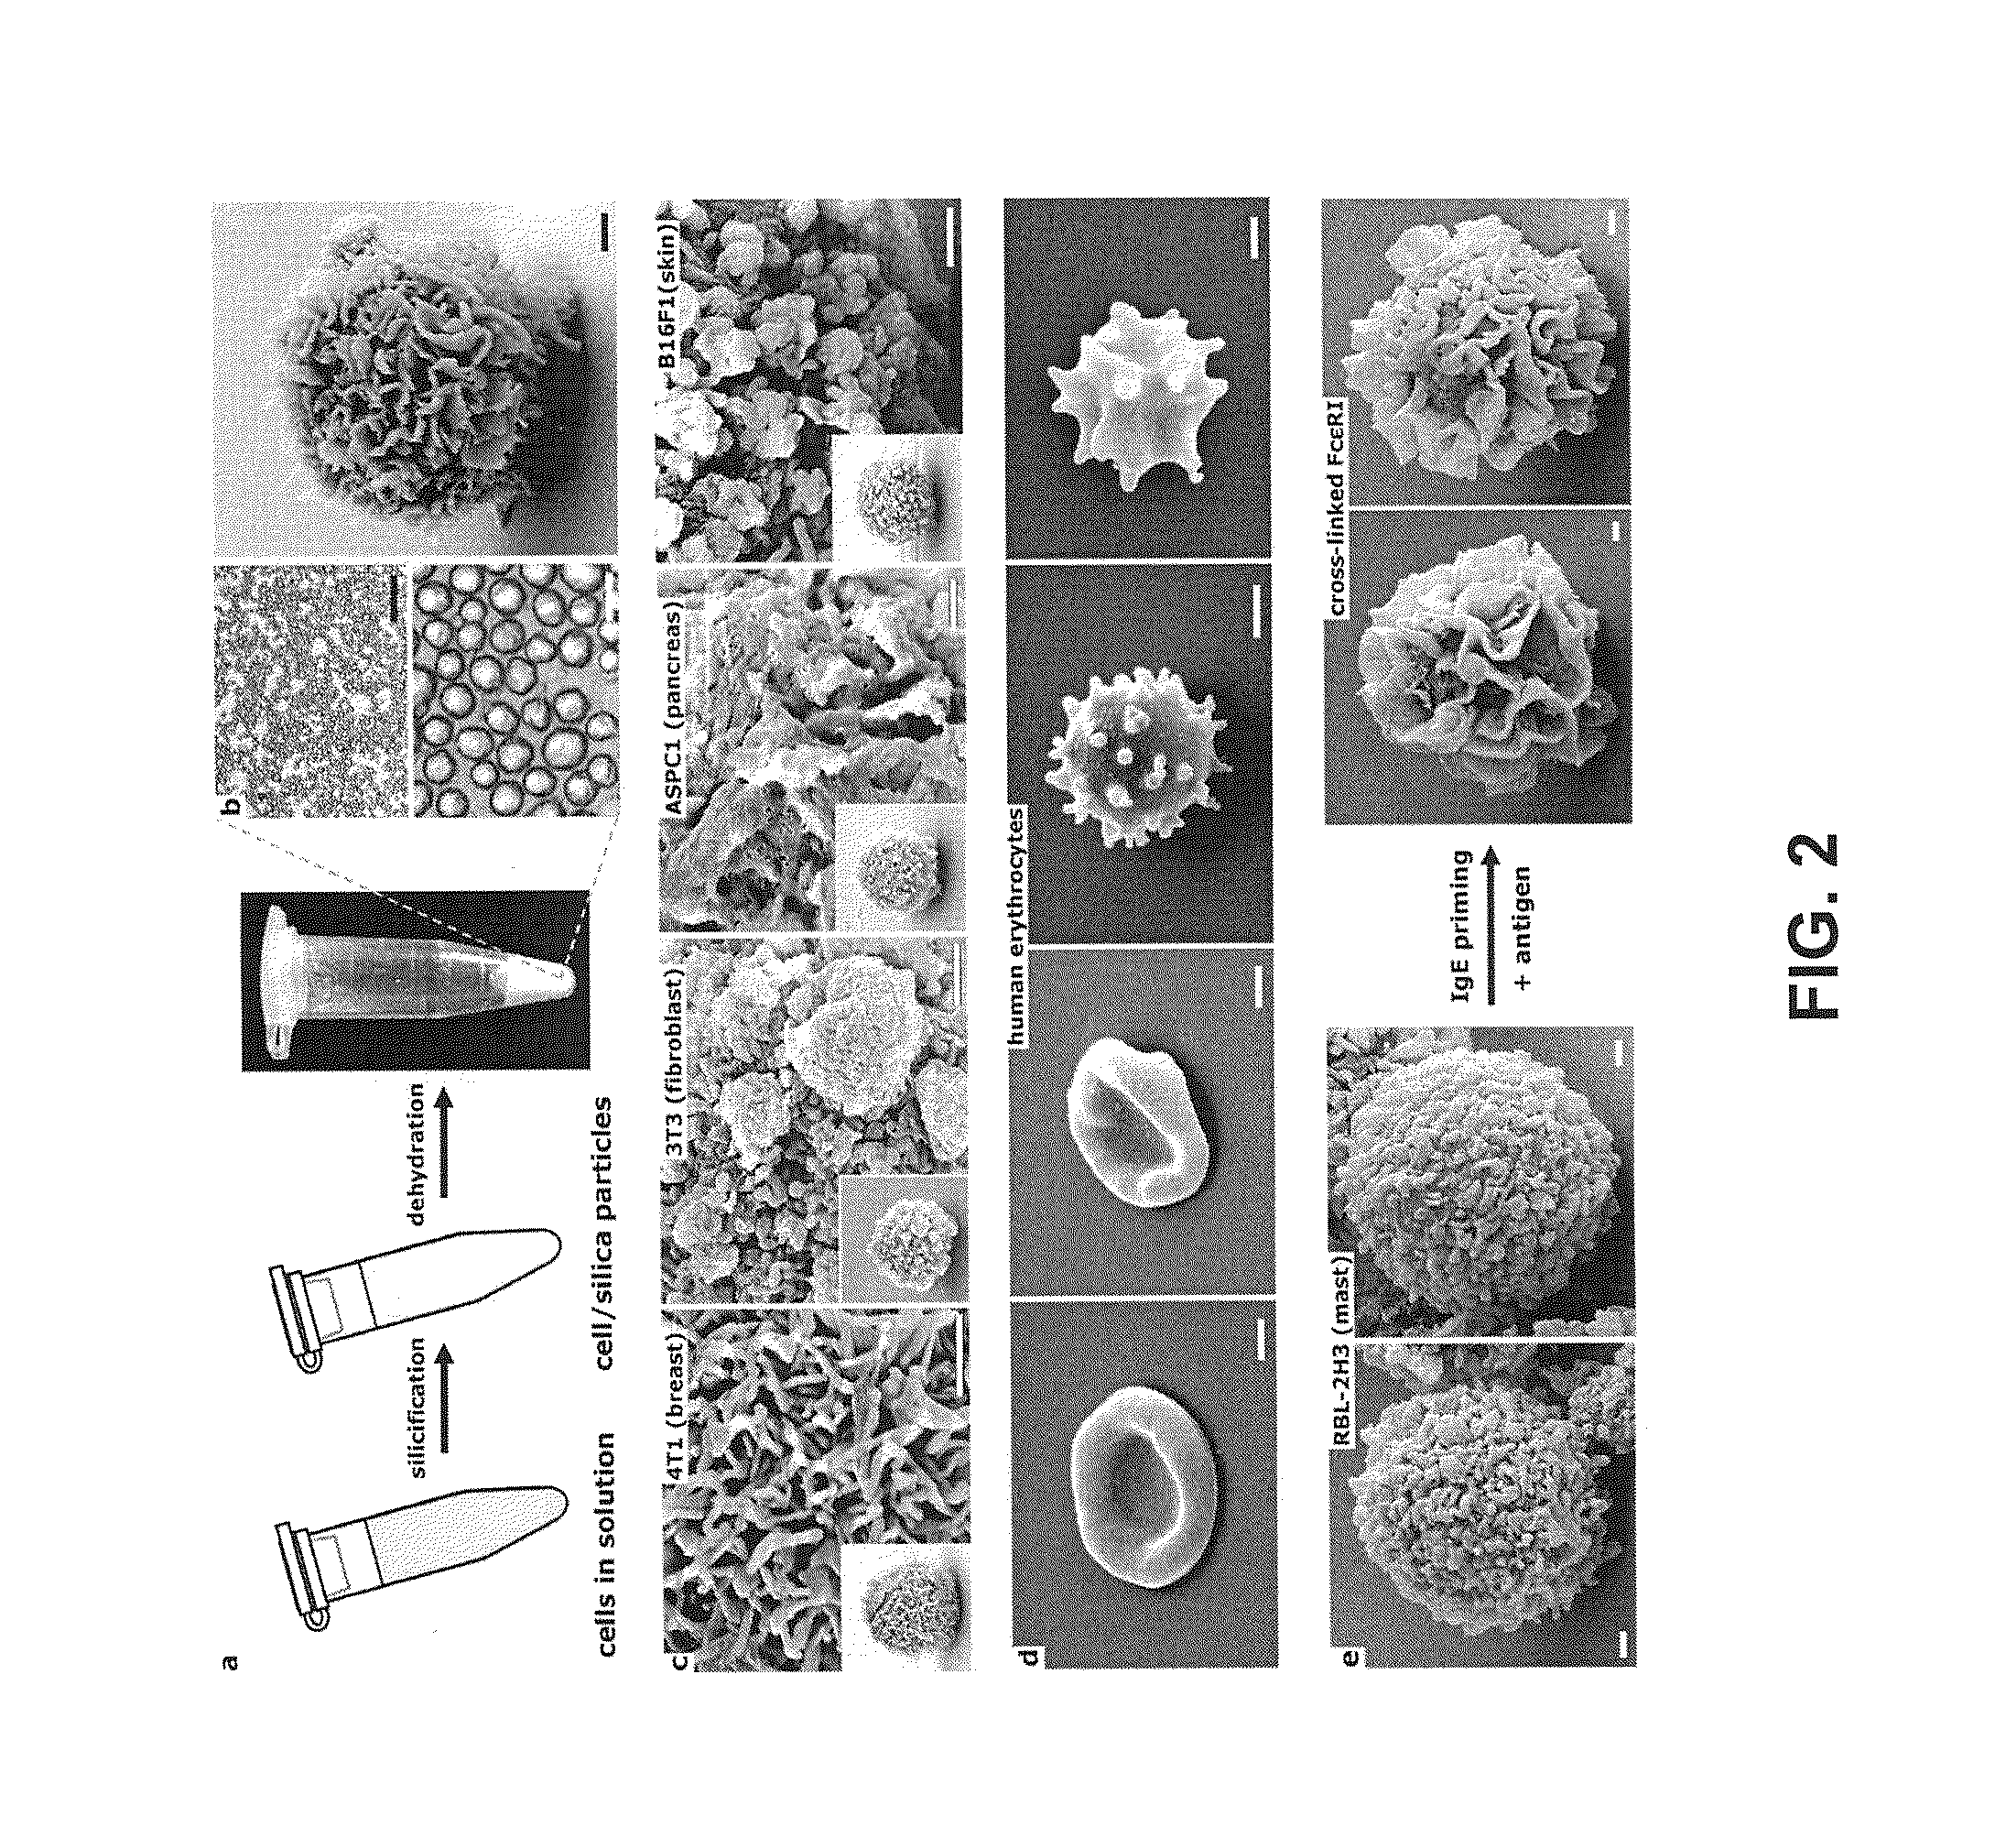 Cell-based composite materials with programmed structures and functions